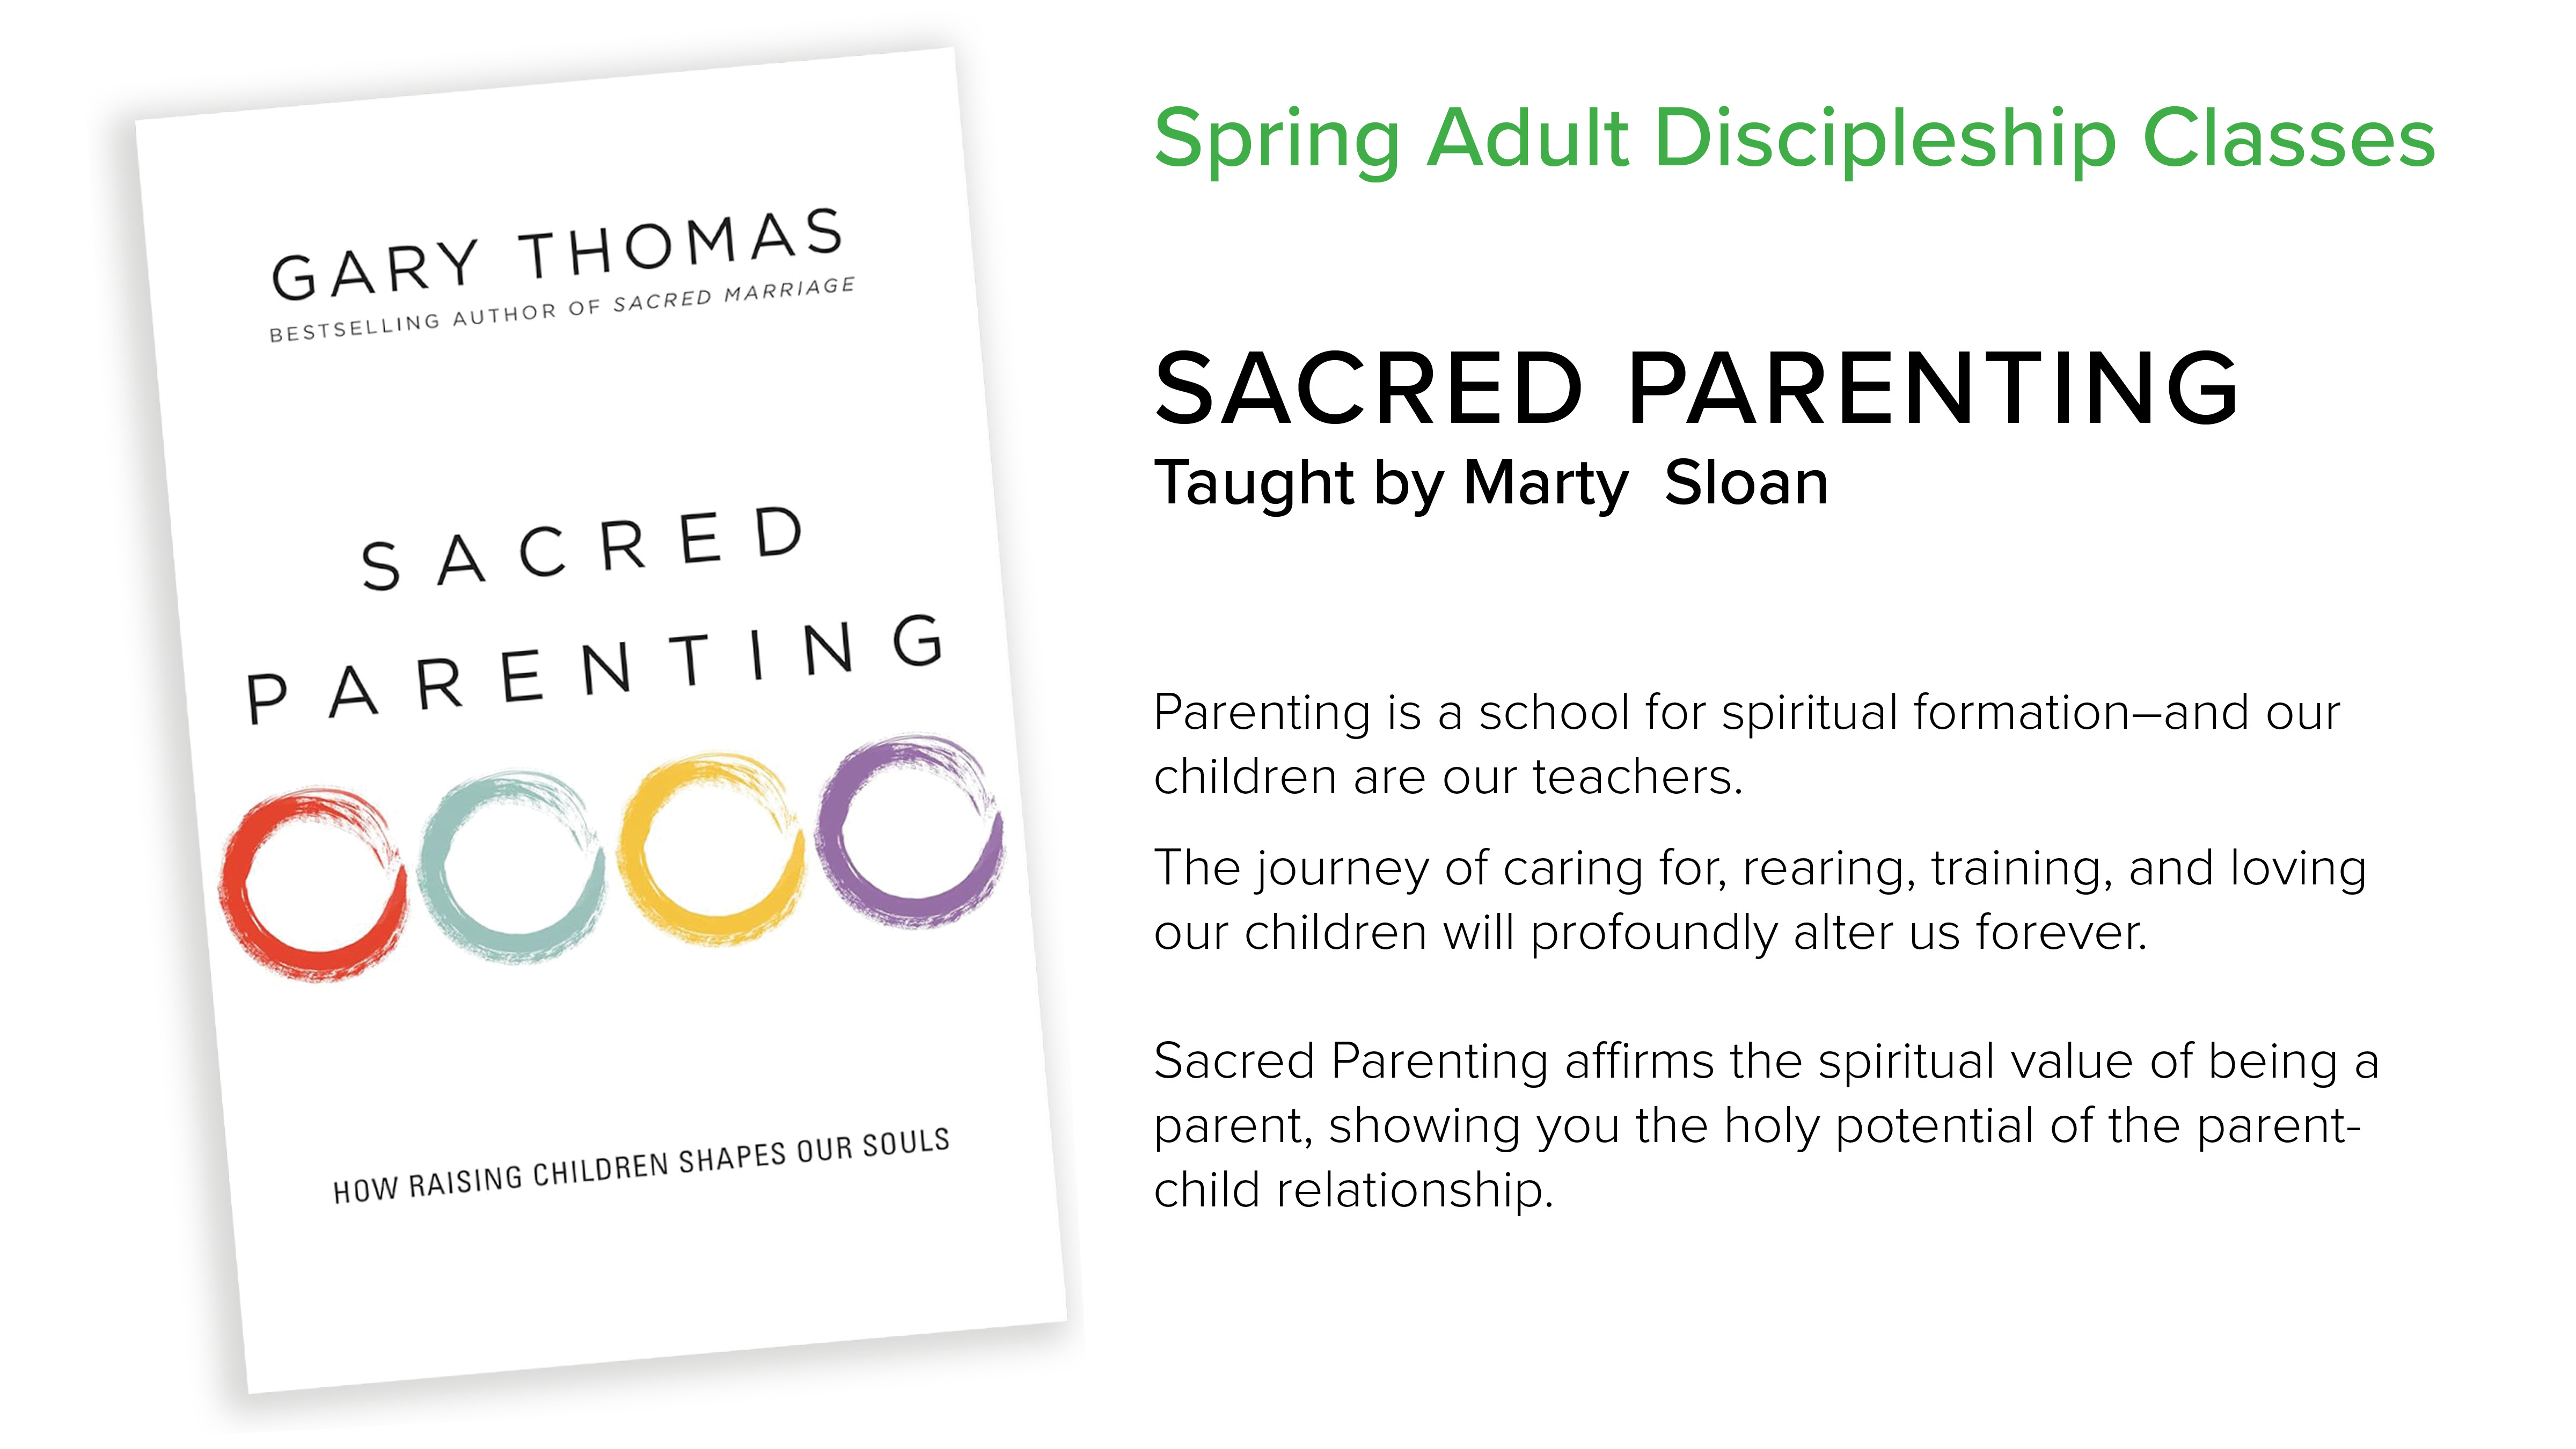 Sacred Parenting affirms the spiritual value of being a parent, showing you the holy potential of the parent-child relationship.